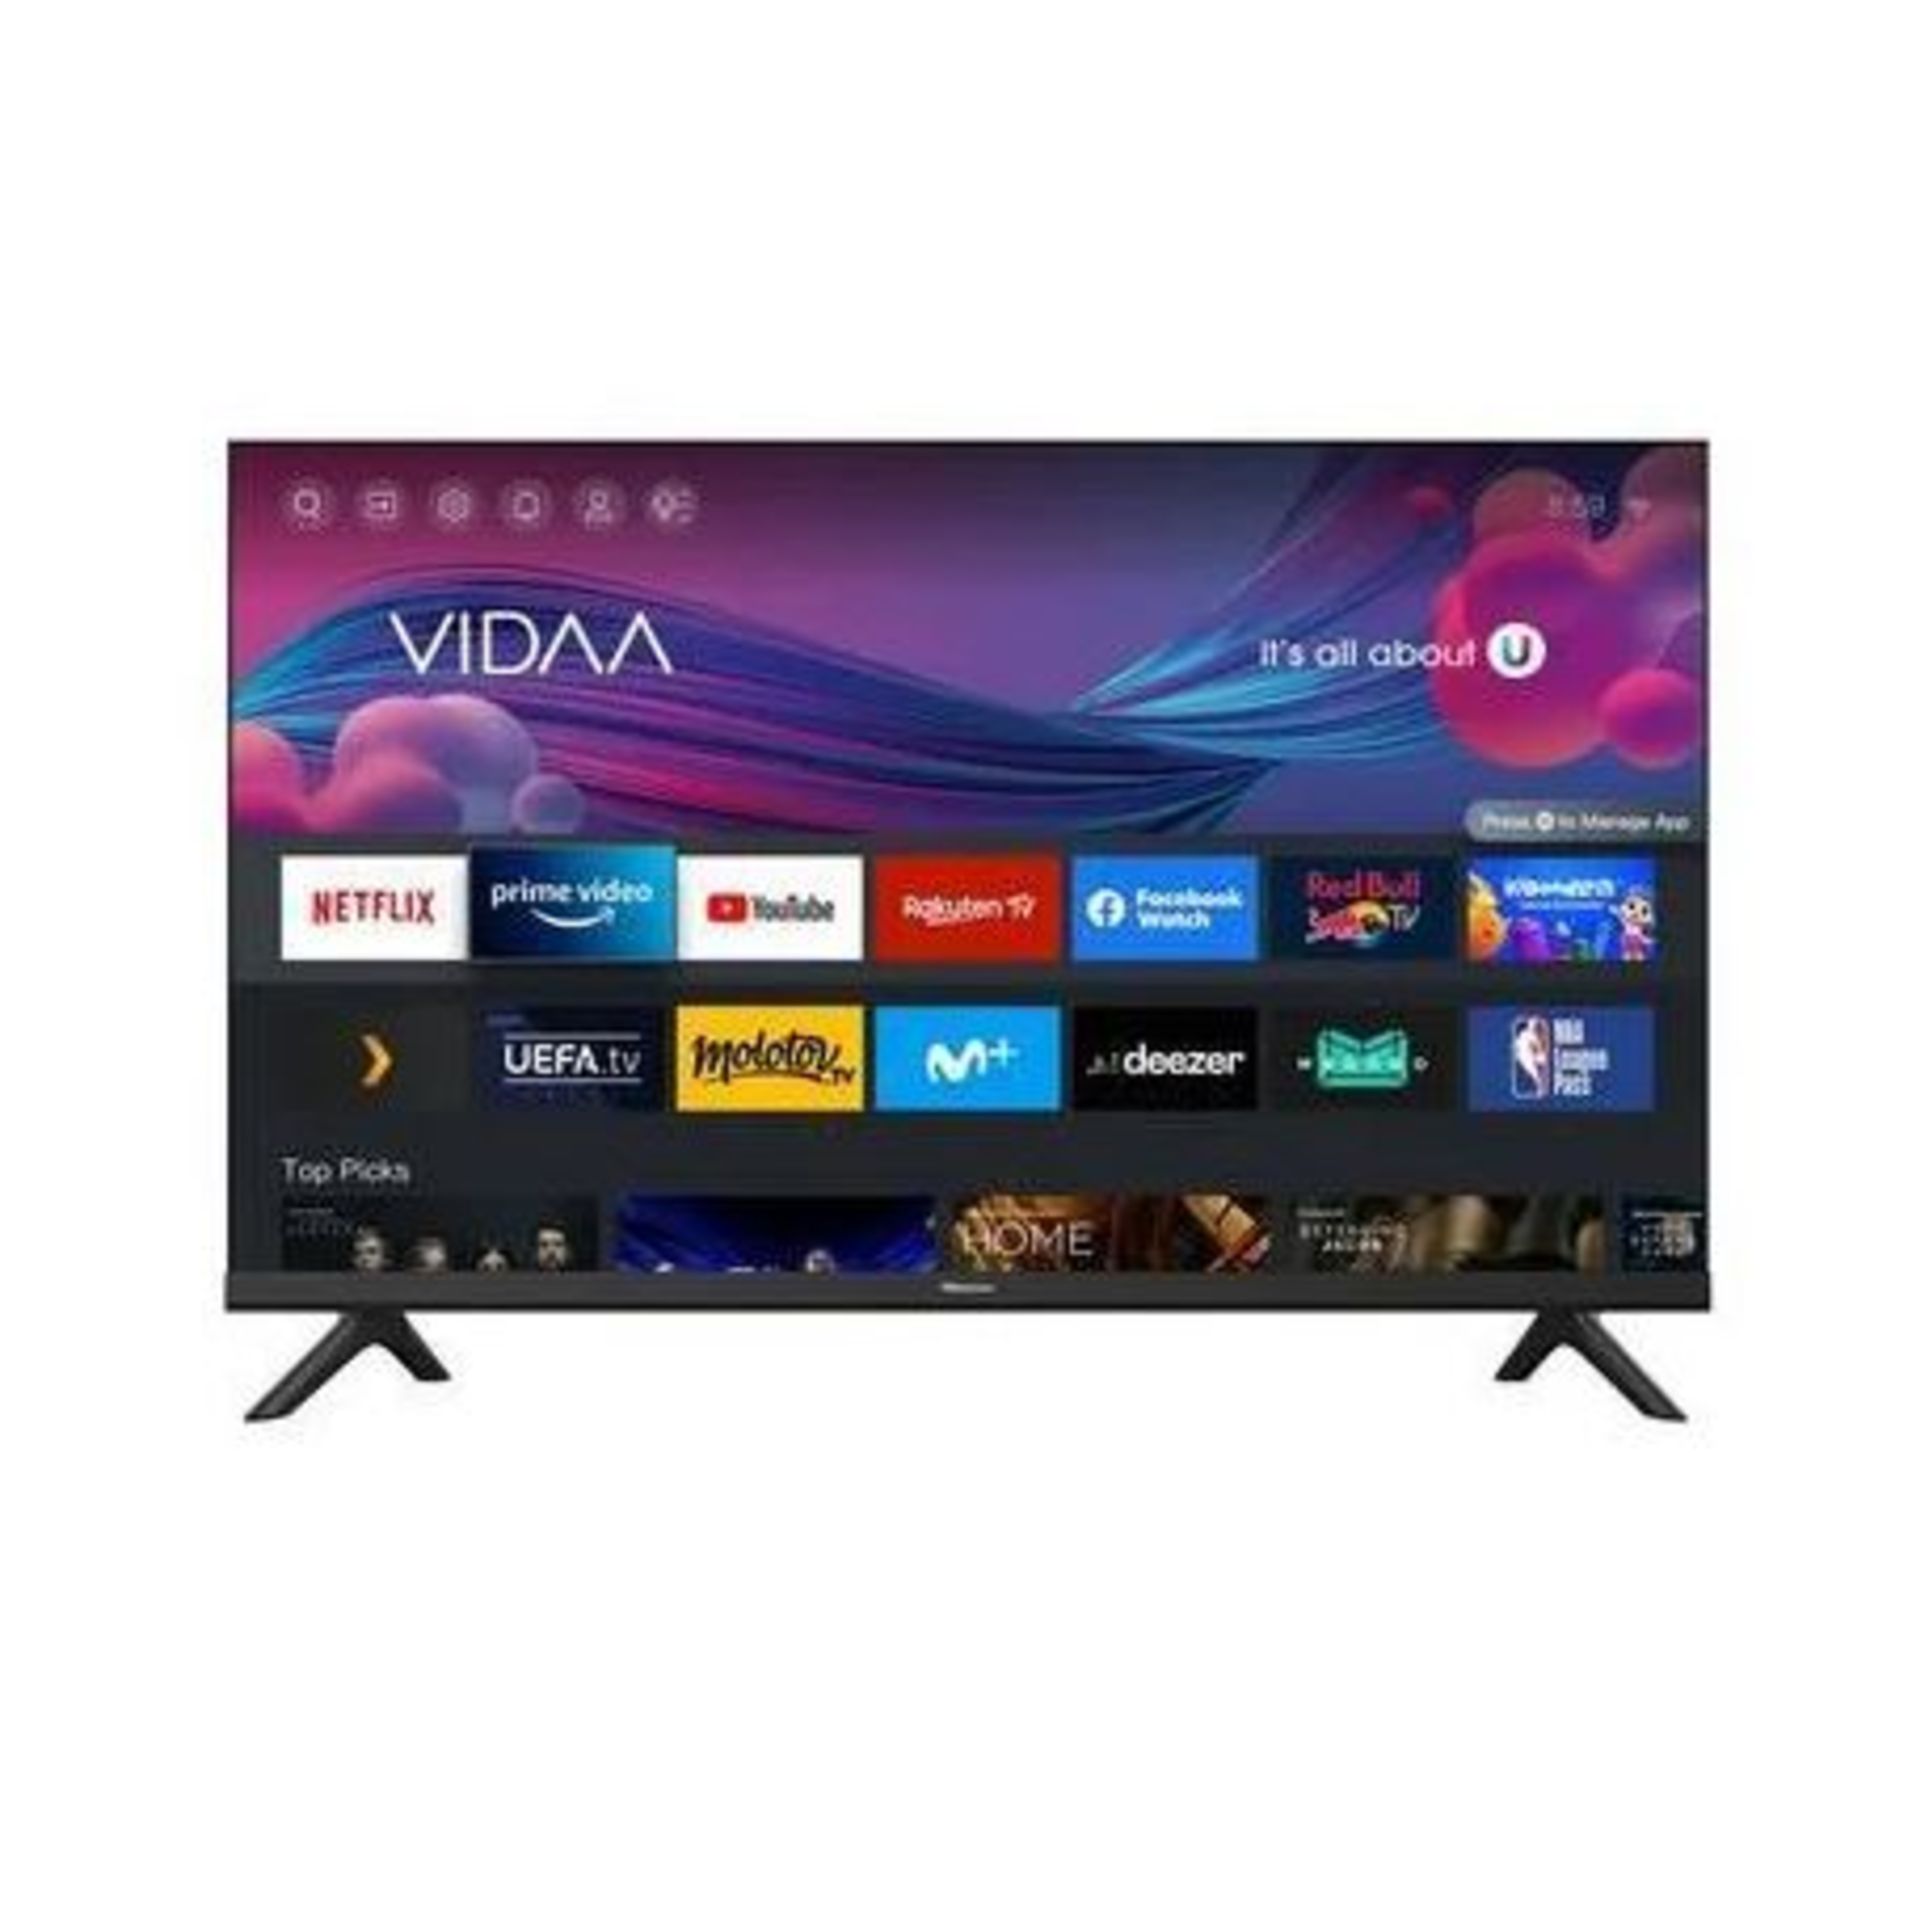 1 BOXED HISENSE 32A4GTUK 32" SMART HD READY LED TV WITH AMAZON ALEXA WITH STAND AND REMOTE RRP Â£229